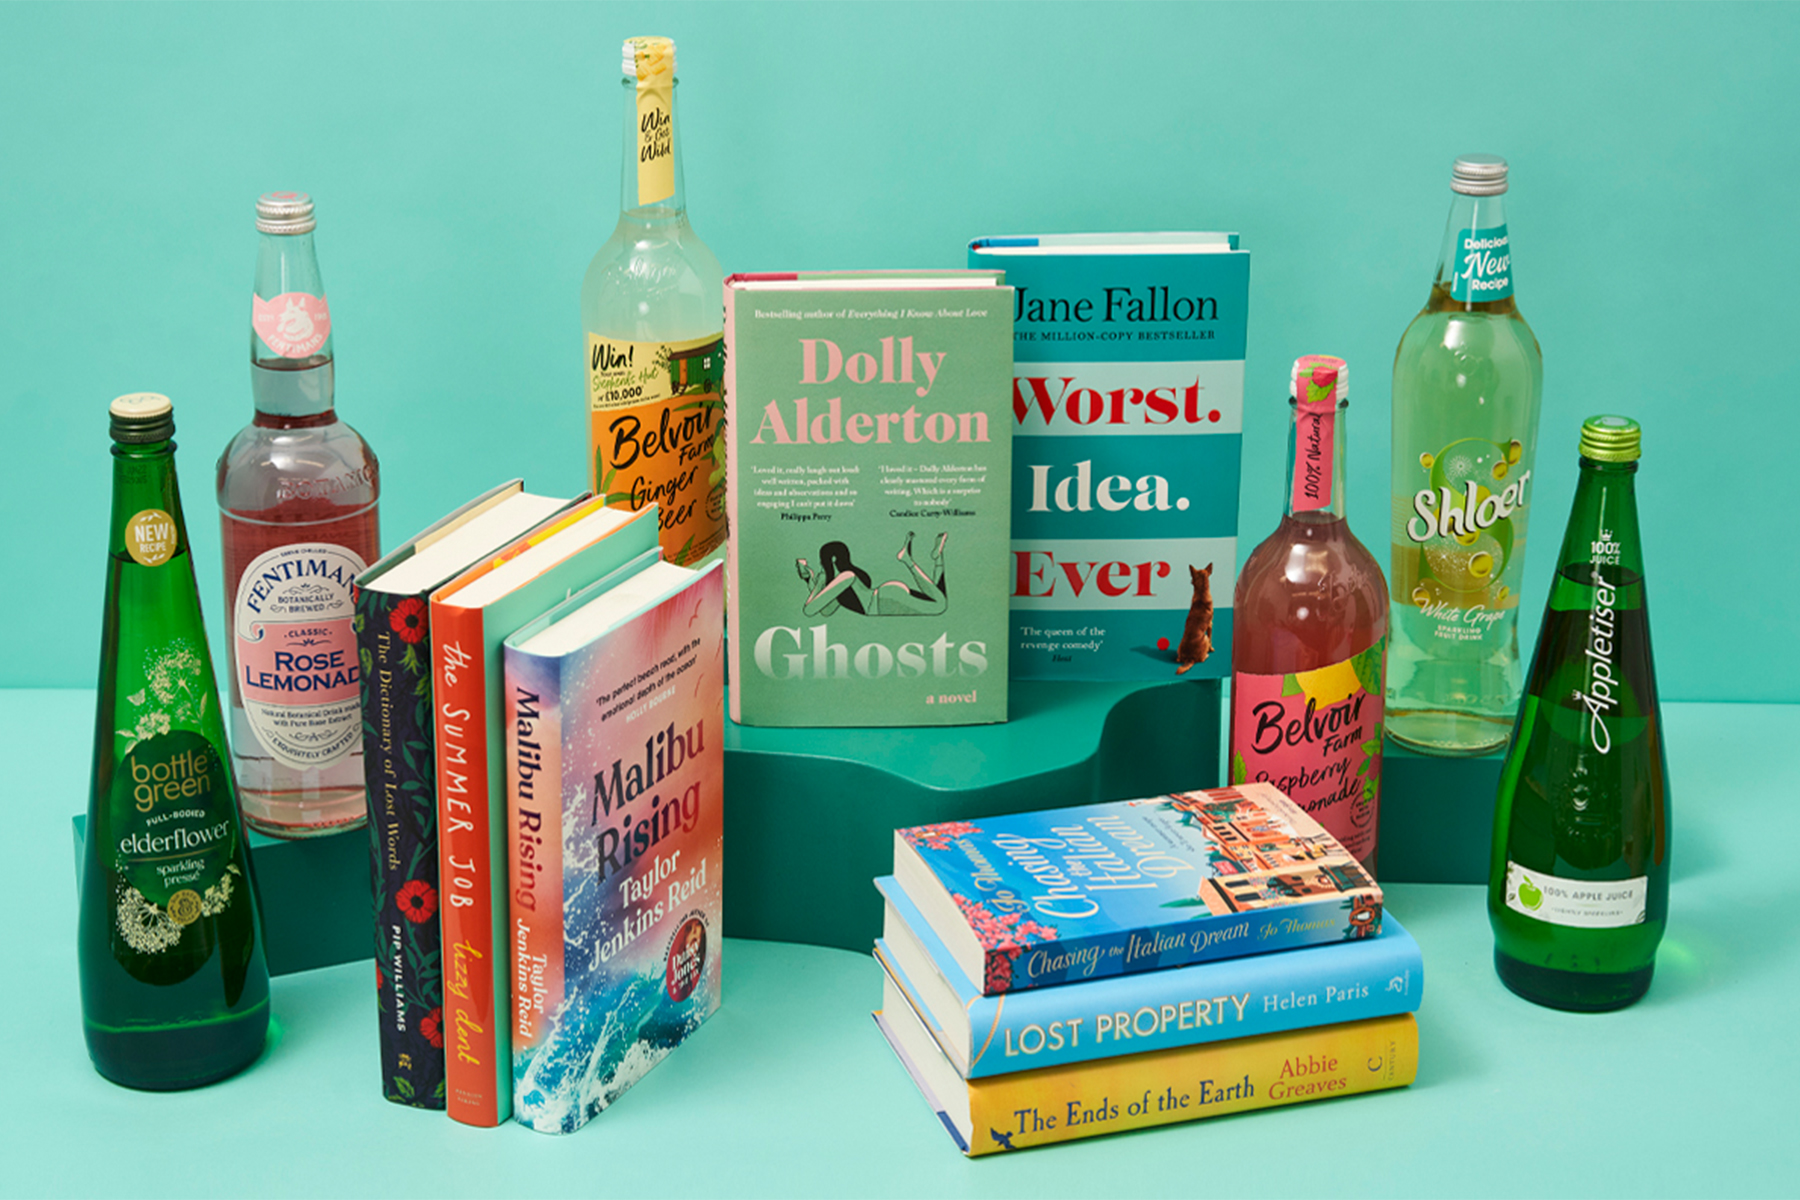 A photograph of eight books and six bottles of spritzes, arranged against a turquoise background.